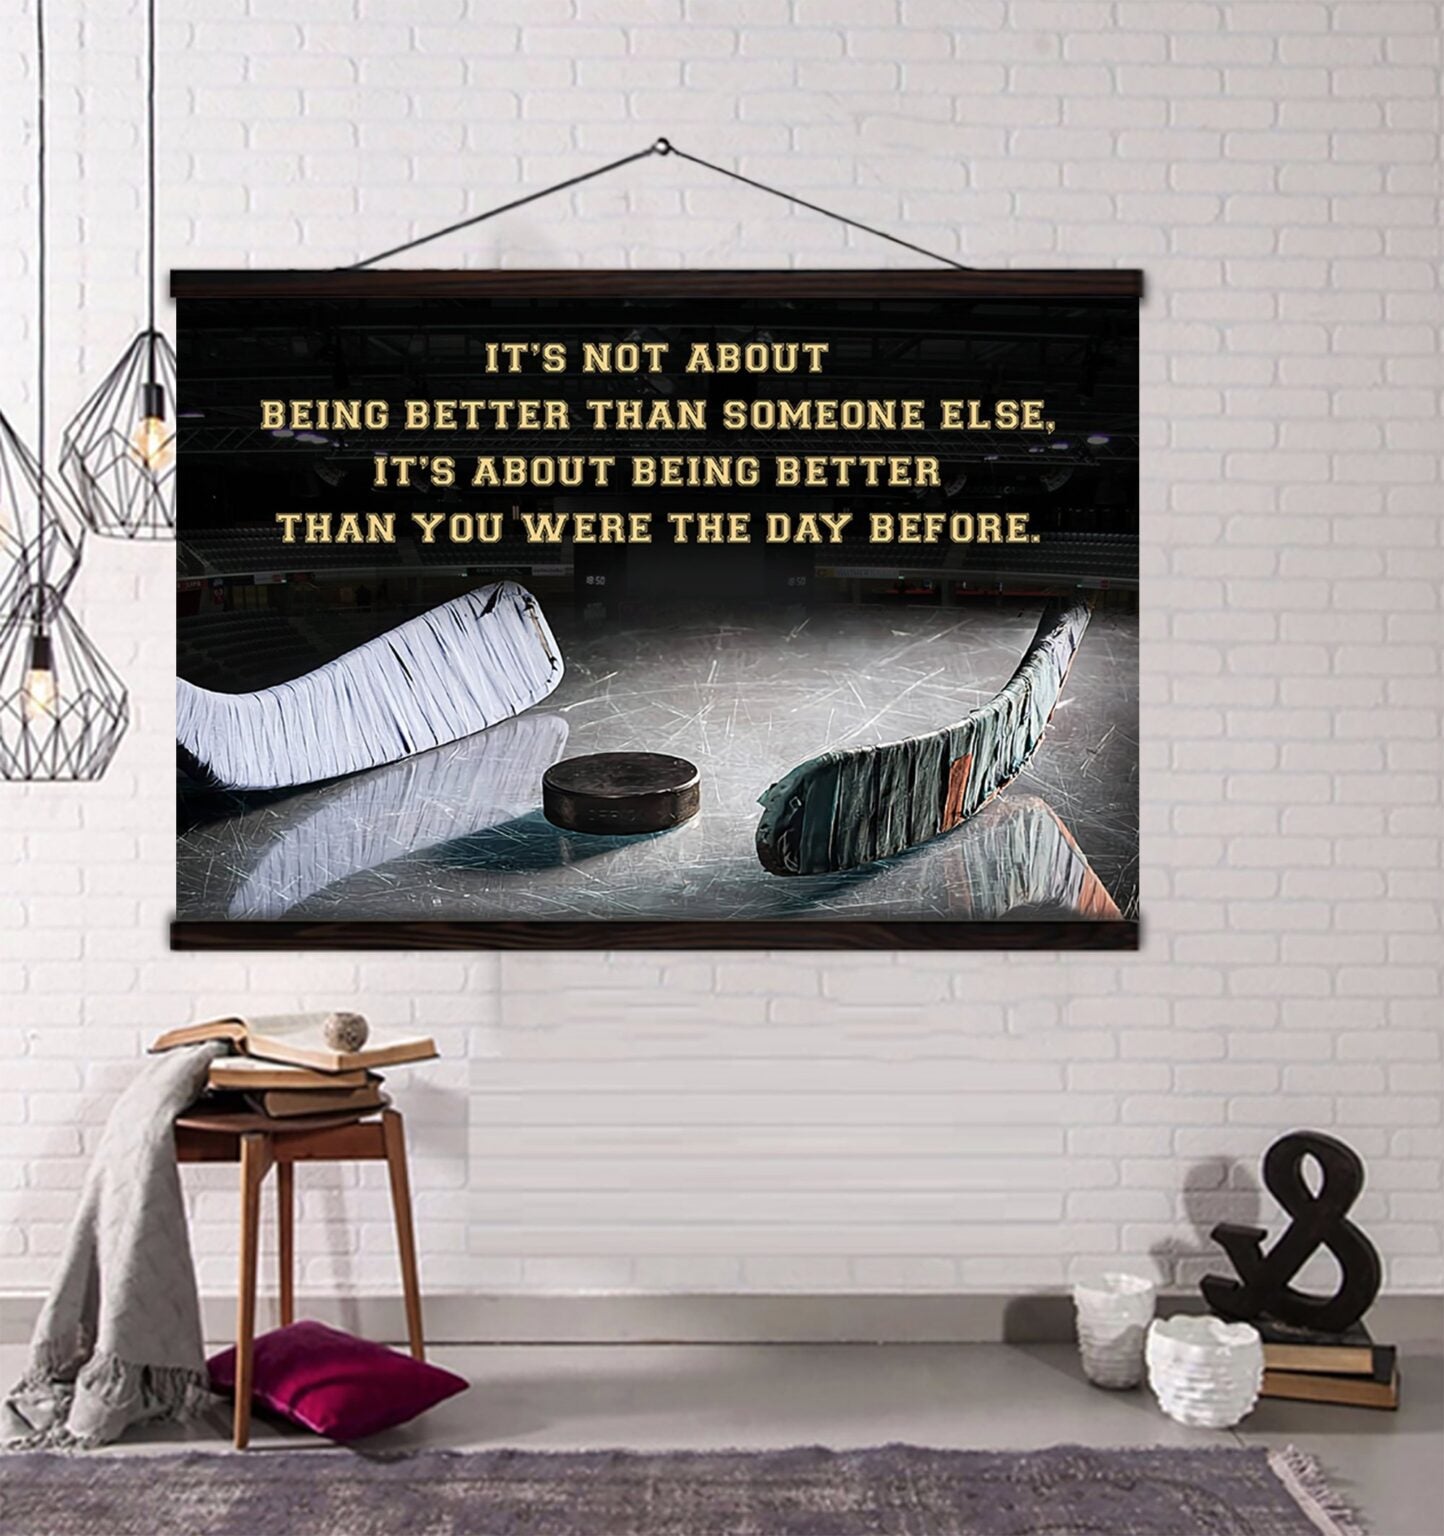 Customizable Hockey poster canvas - You will Never Lose You Either Win Or Learn I Can Promise To Love You For The Rest Of Mine